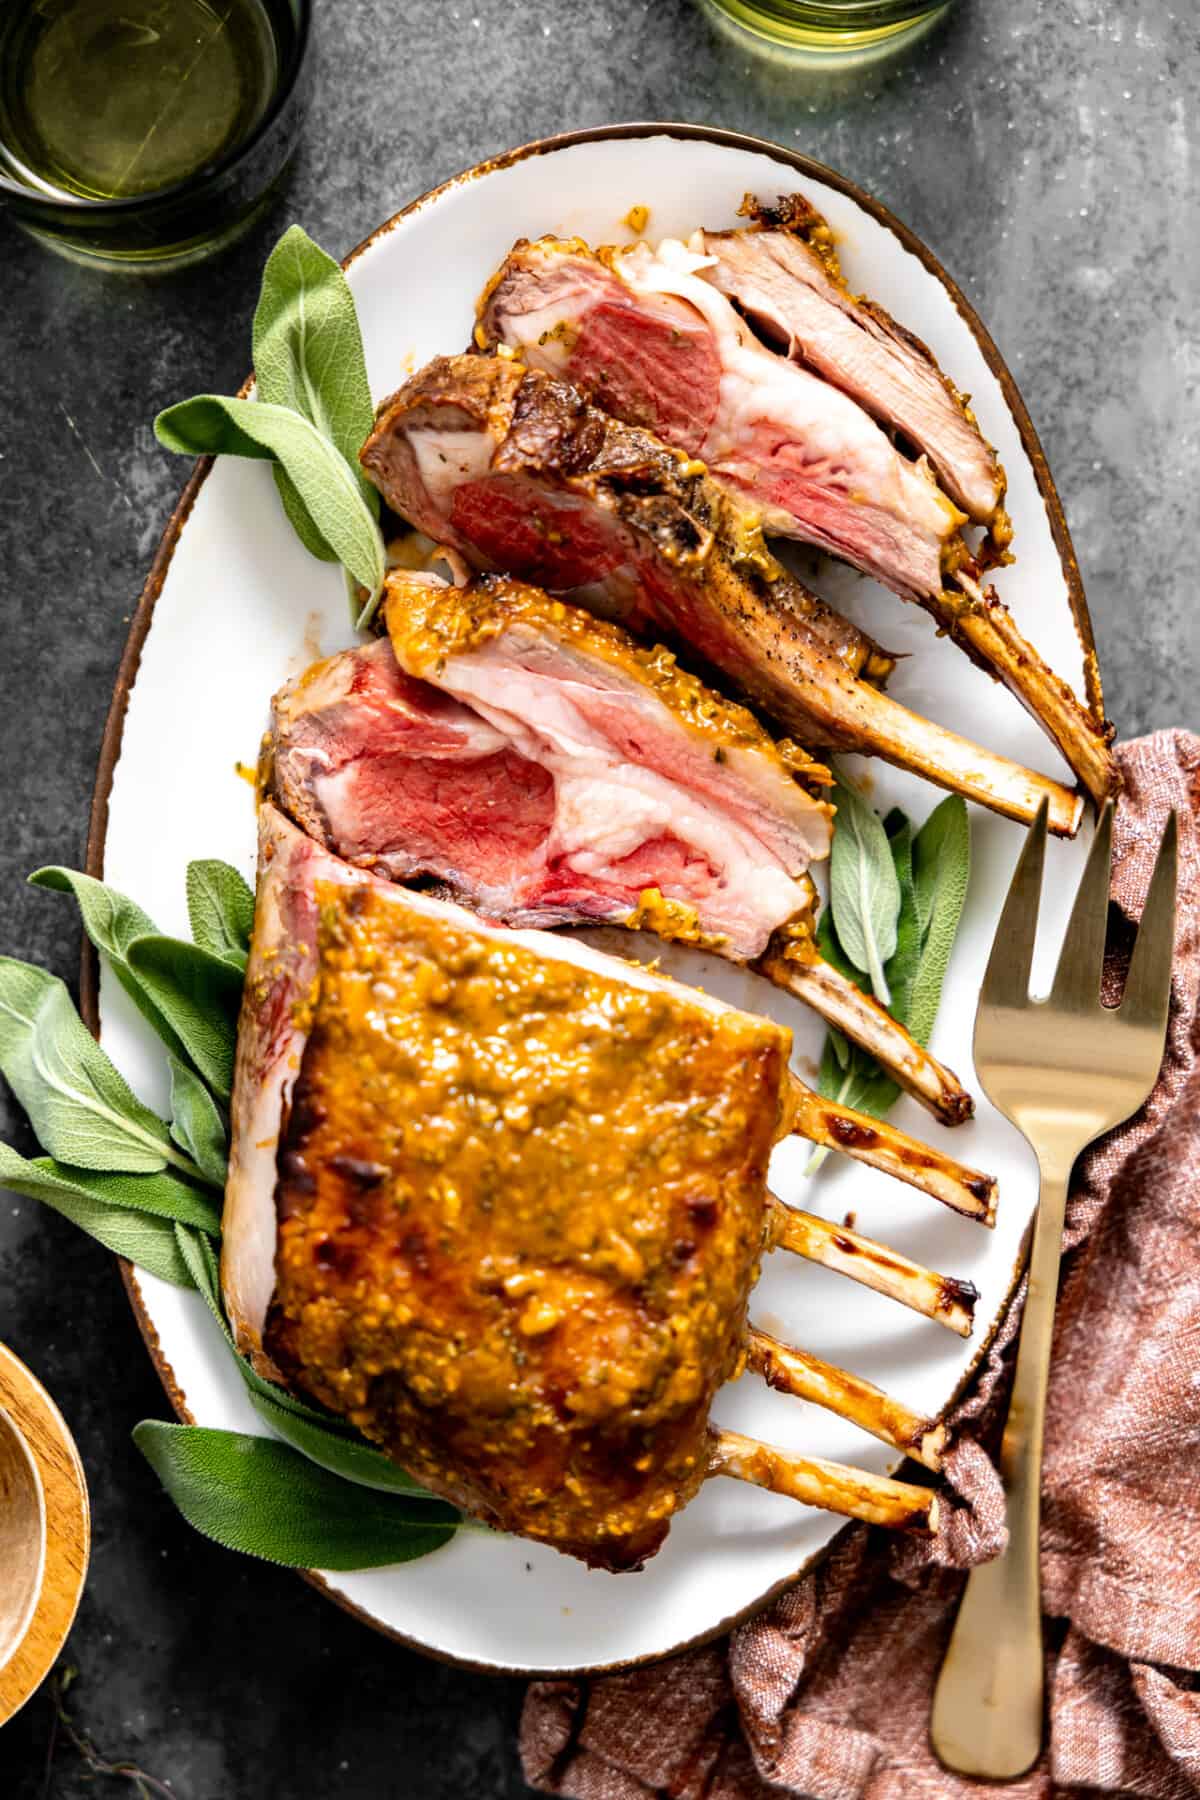 Sliced rack of lamb on a plate.